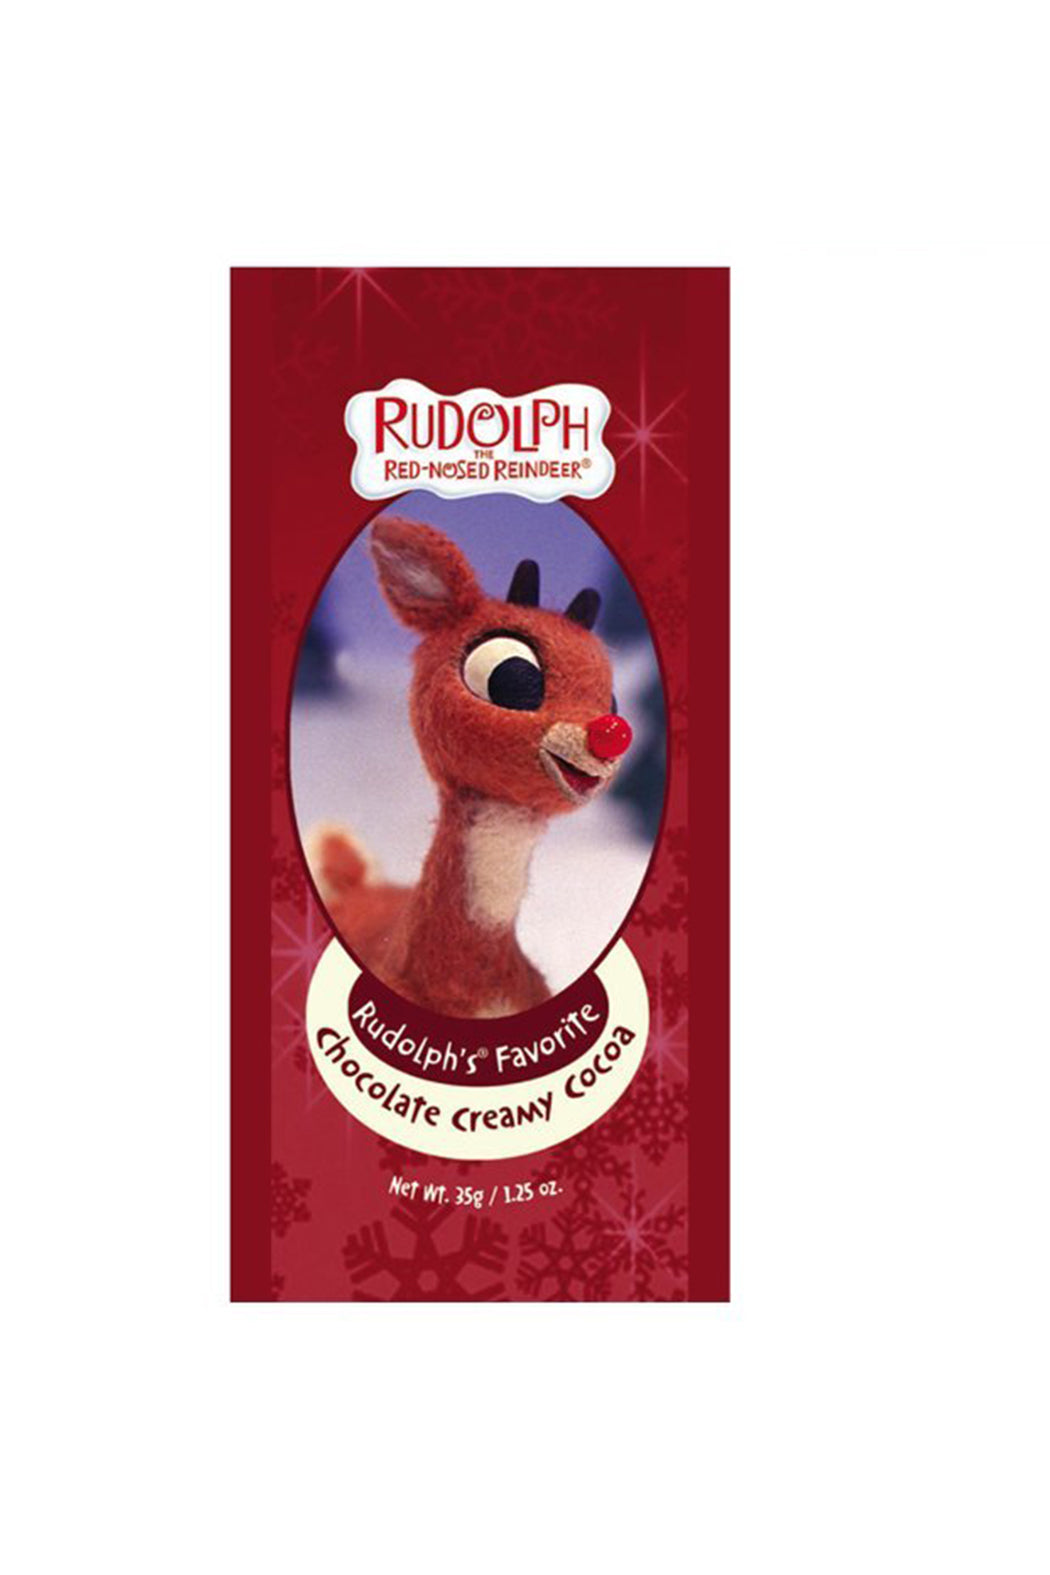 Nassau Candy Rudolph's Favorite Chocolate Creamy Cocoa Packet